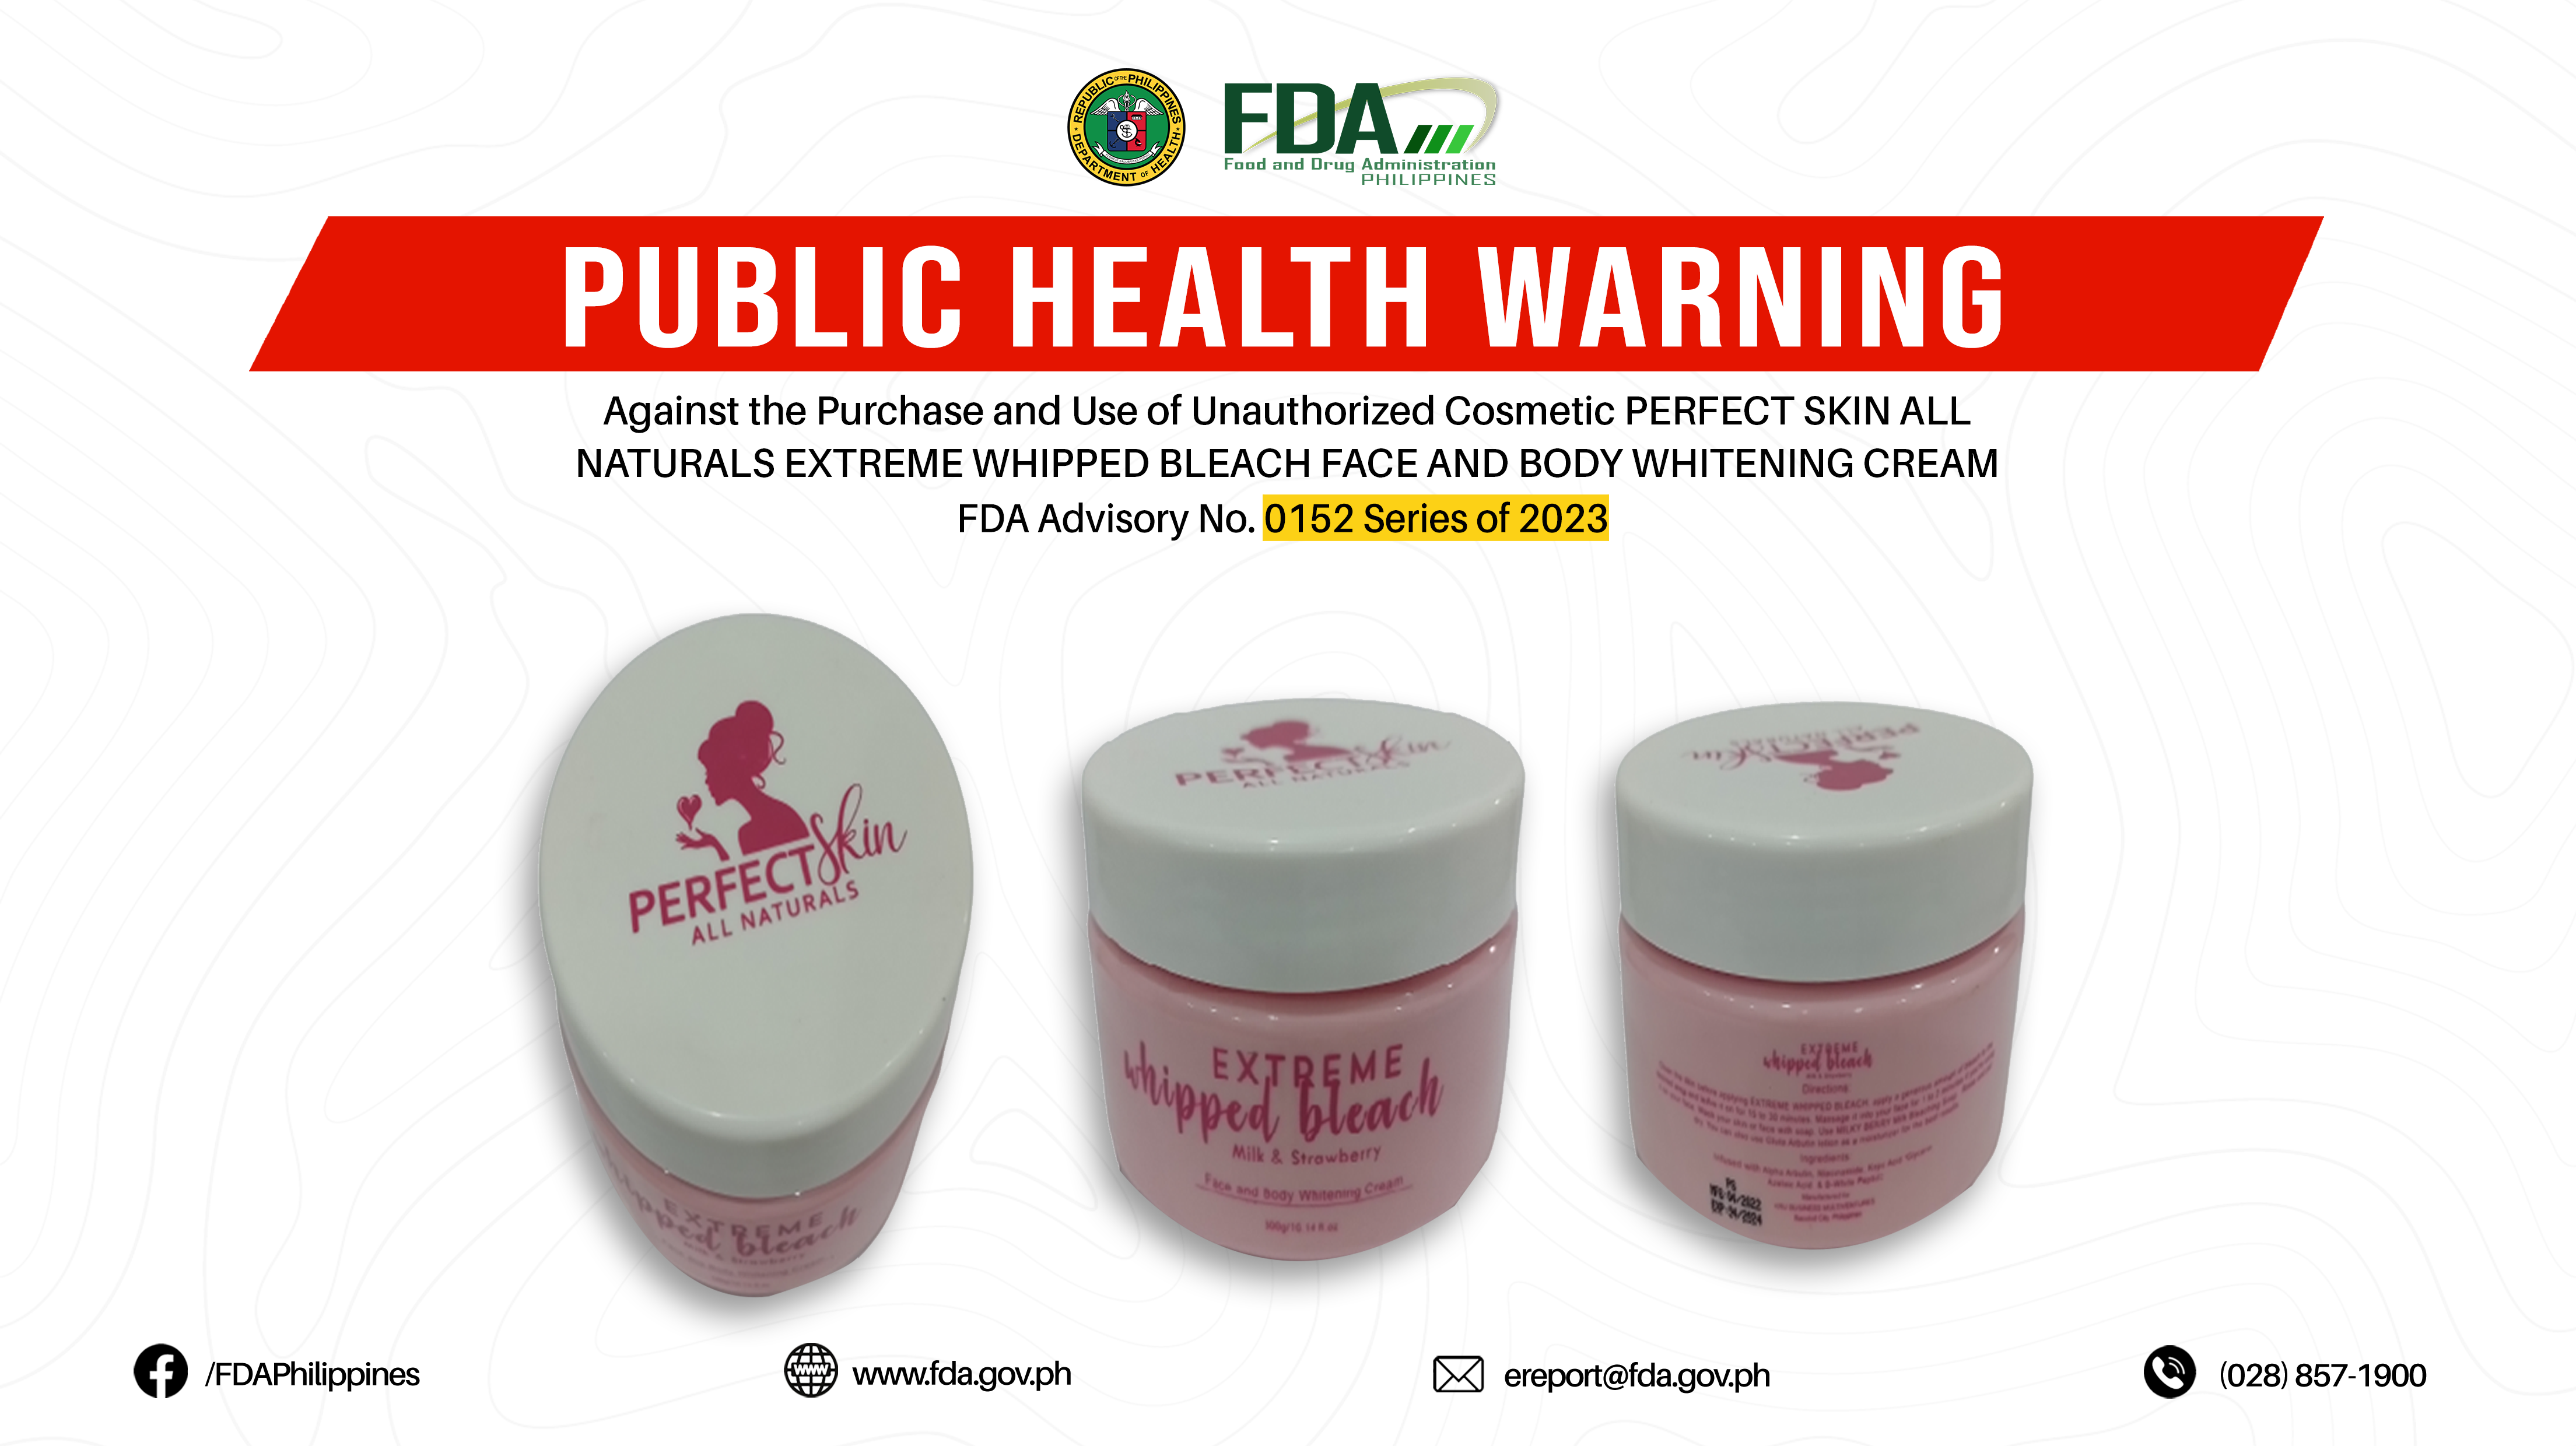 FDA Advisory No.2023-0152 || Public Health Warning Against the Purchase and Use of Unauthorized Cosmetic PERFECT SKIN ALL NATURALS EXTREME WHIPPED BLEACH FACE AND BODY WHITENING CREAM